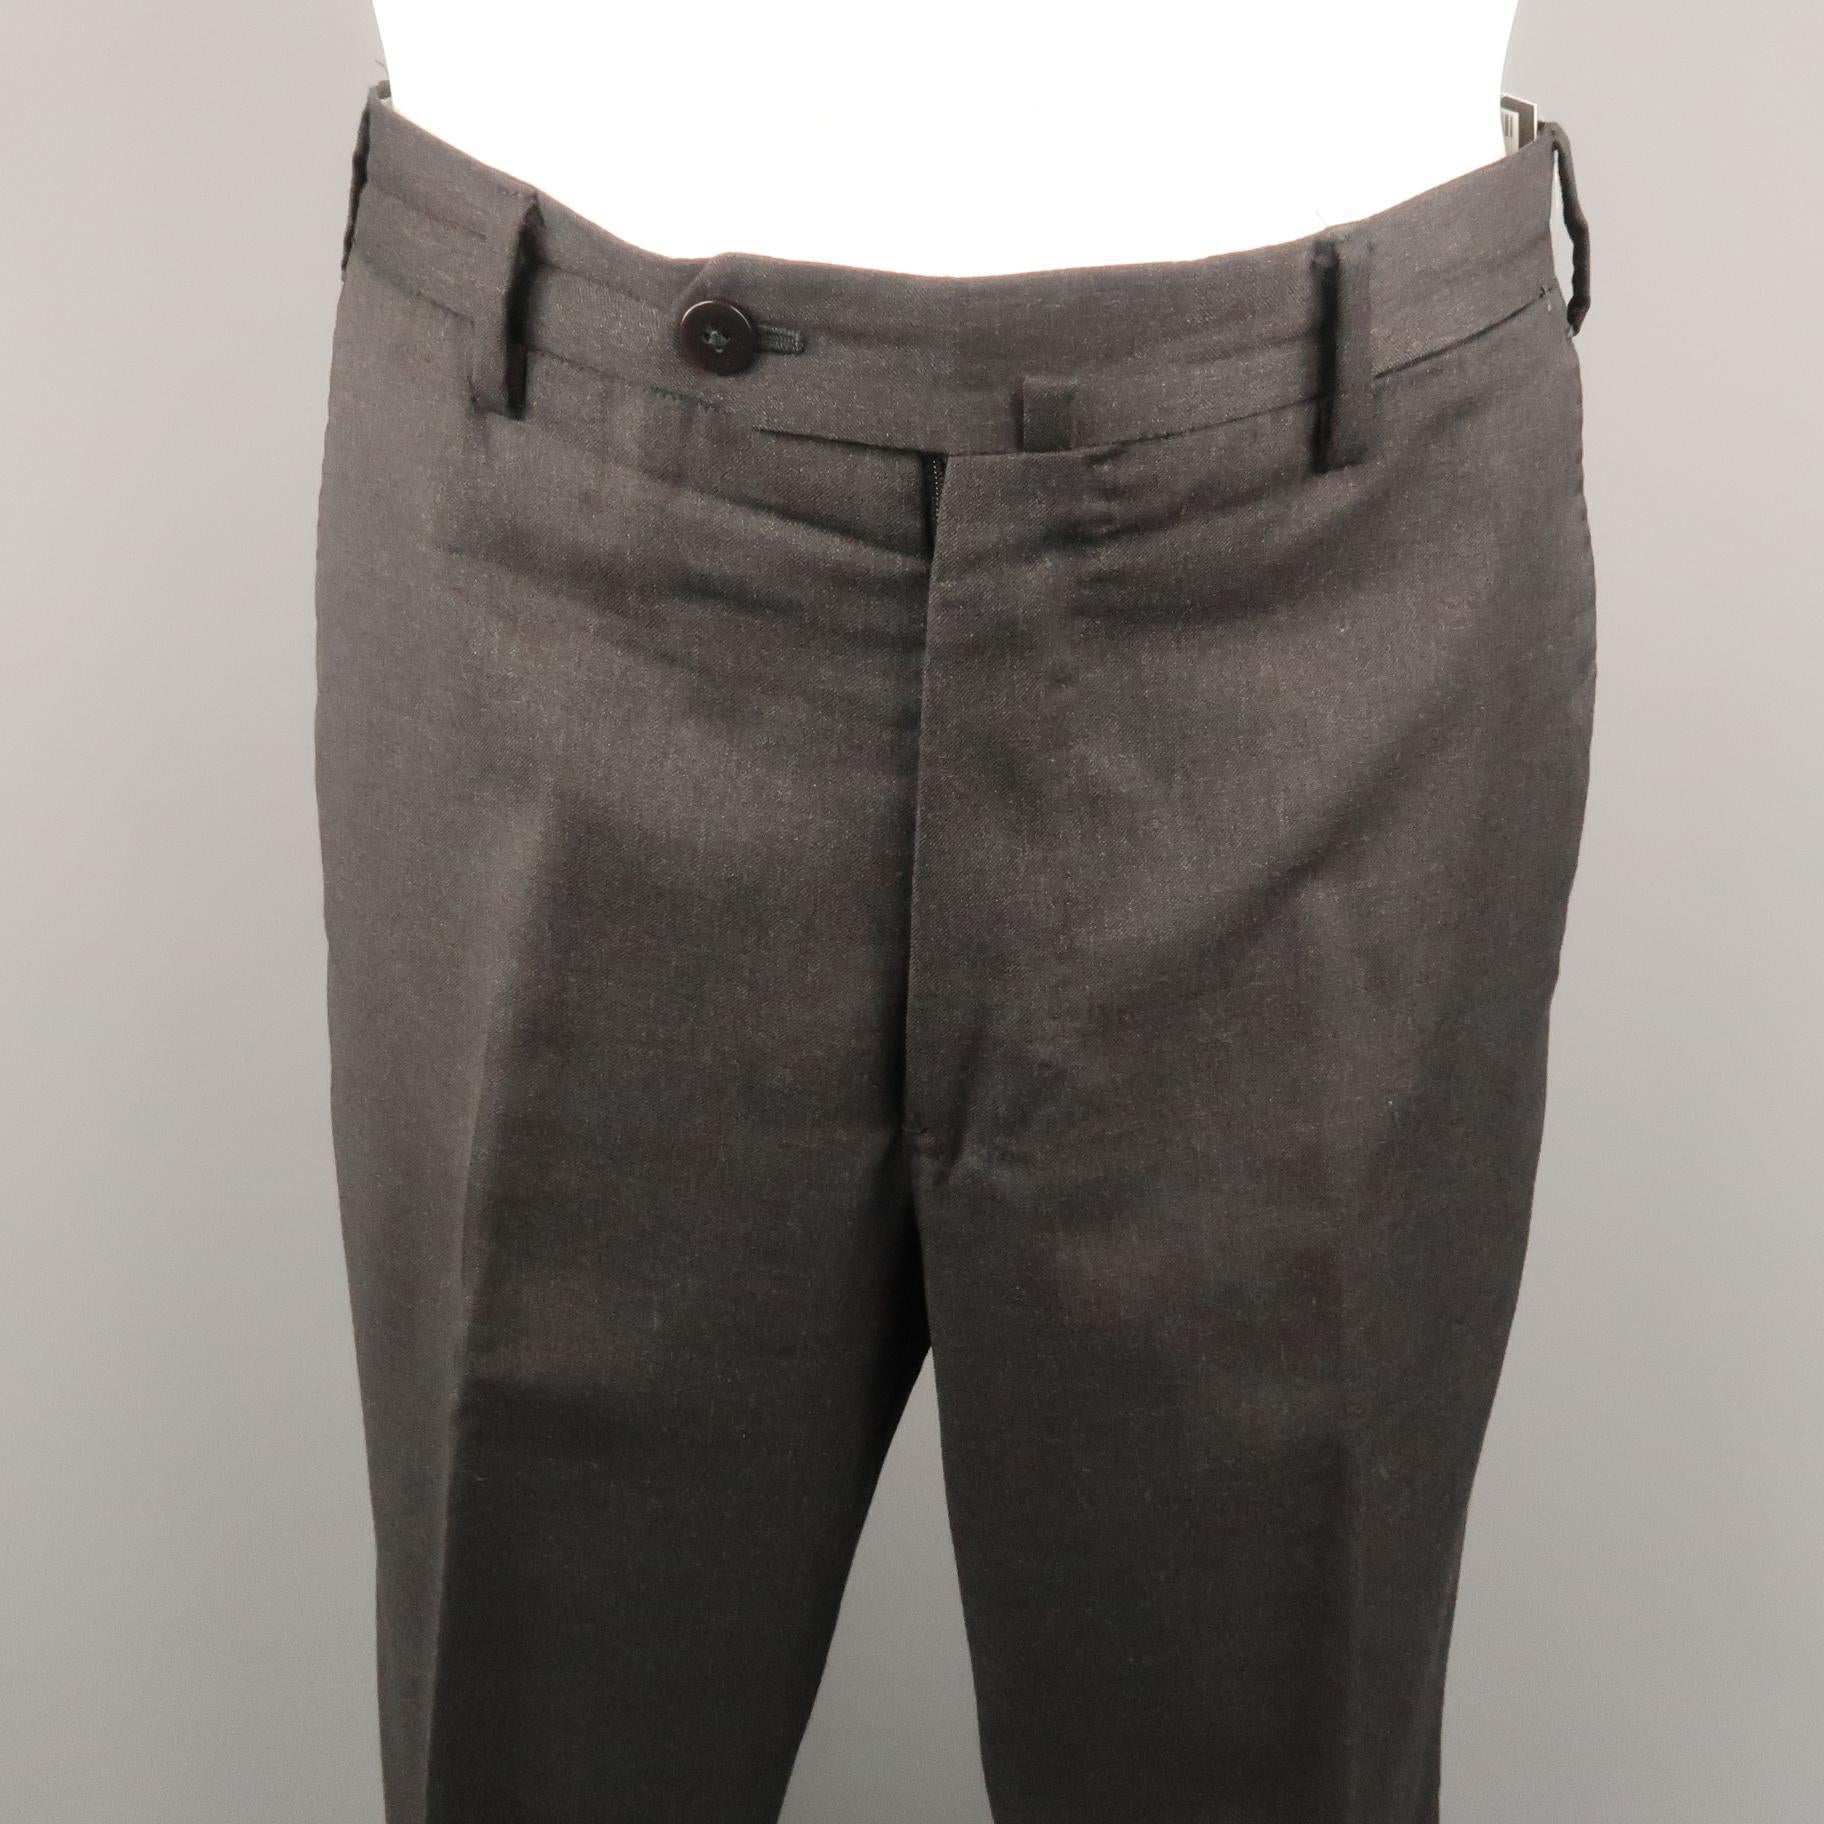 BORRELLI dress pant comes in a charcoal lana wool featuring a flat front style and a zip fly closure. Made in Italy.
 
Excellent Pre-Owned Condition.
Marked: IT 48
 
Measurements:
 
Waist: 32 in.
Rise: 9 in.
Inseam: 28 in.
SKU: 95309
Category: Dress